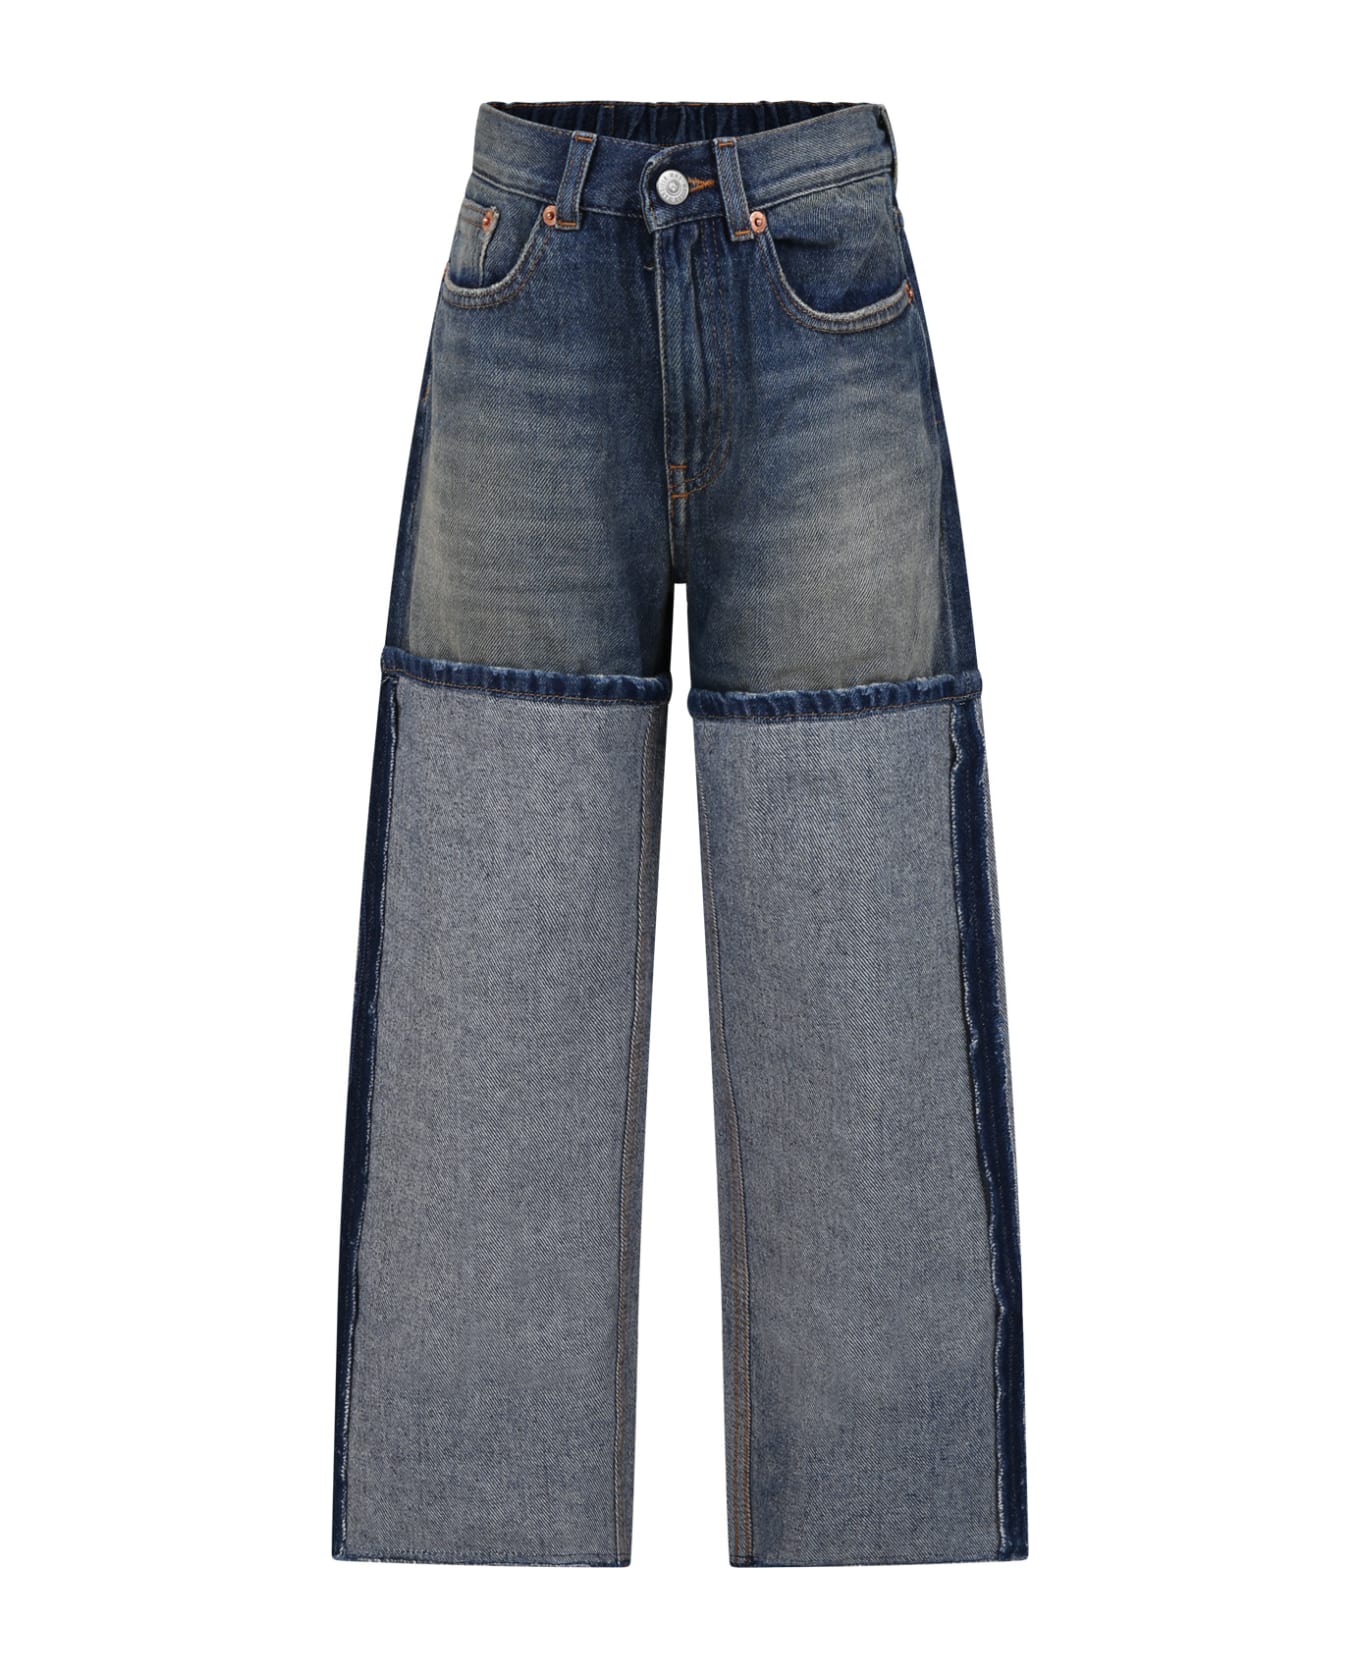 MM6 Maison Margiela Denim Jeans For Girl With Contrasting Stitching - Denim